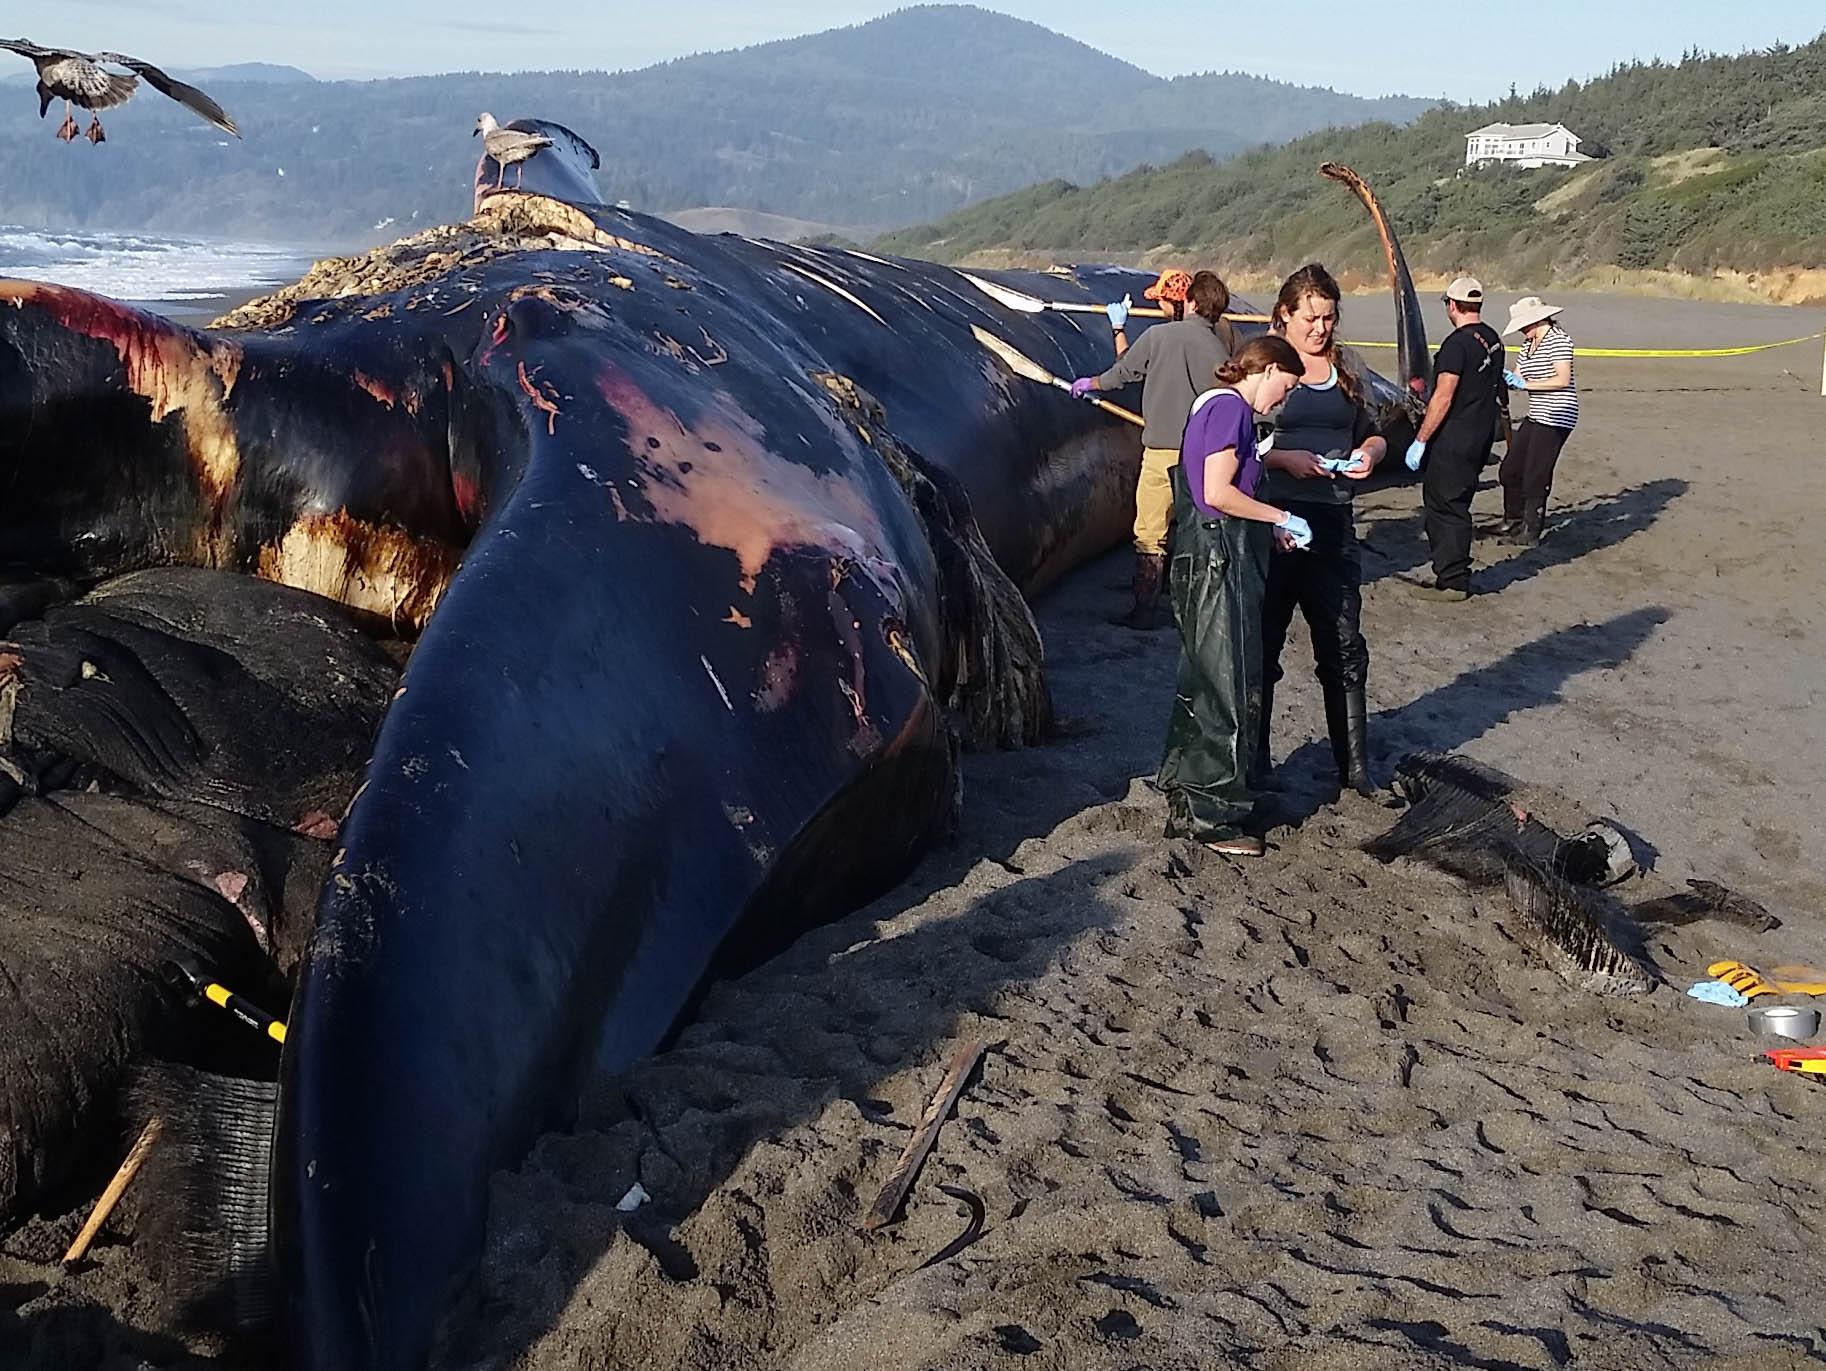 Twisted Fradrage TRUE Rare Blue Whale Washes Up On Oregon Beach - OPB